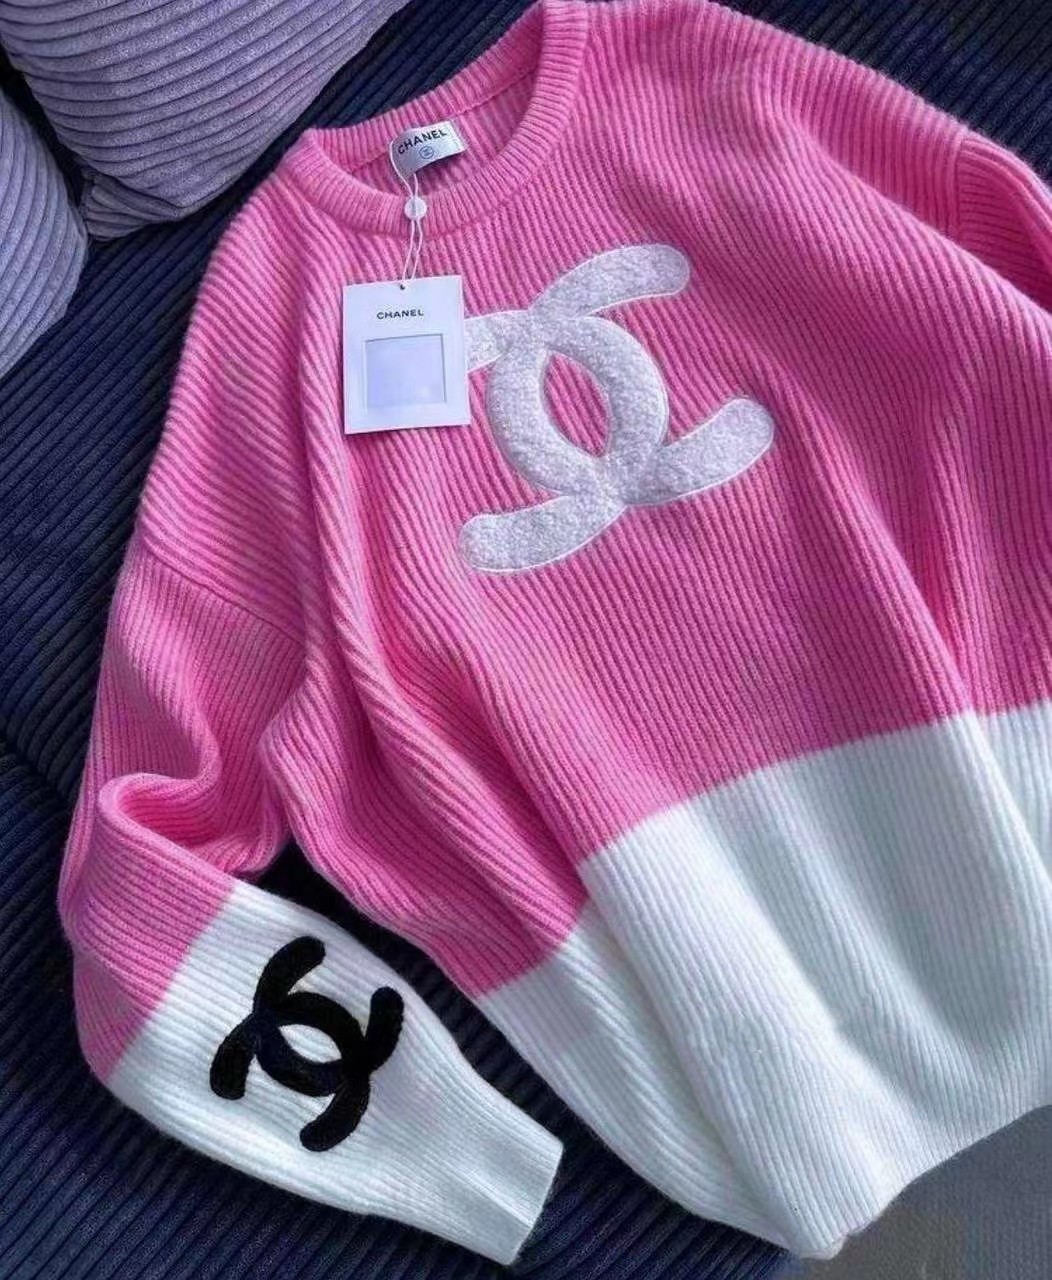 Chanel Clothing Knit Sweater Sweatshirts Embroidery Knitting Fall/Winter Collection